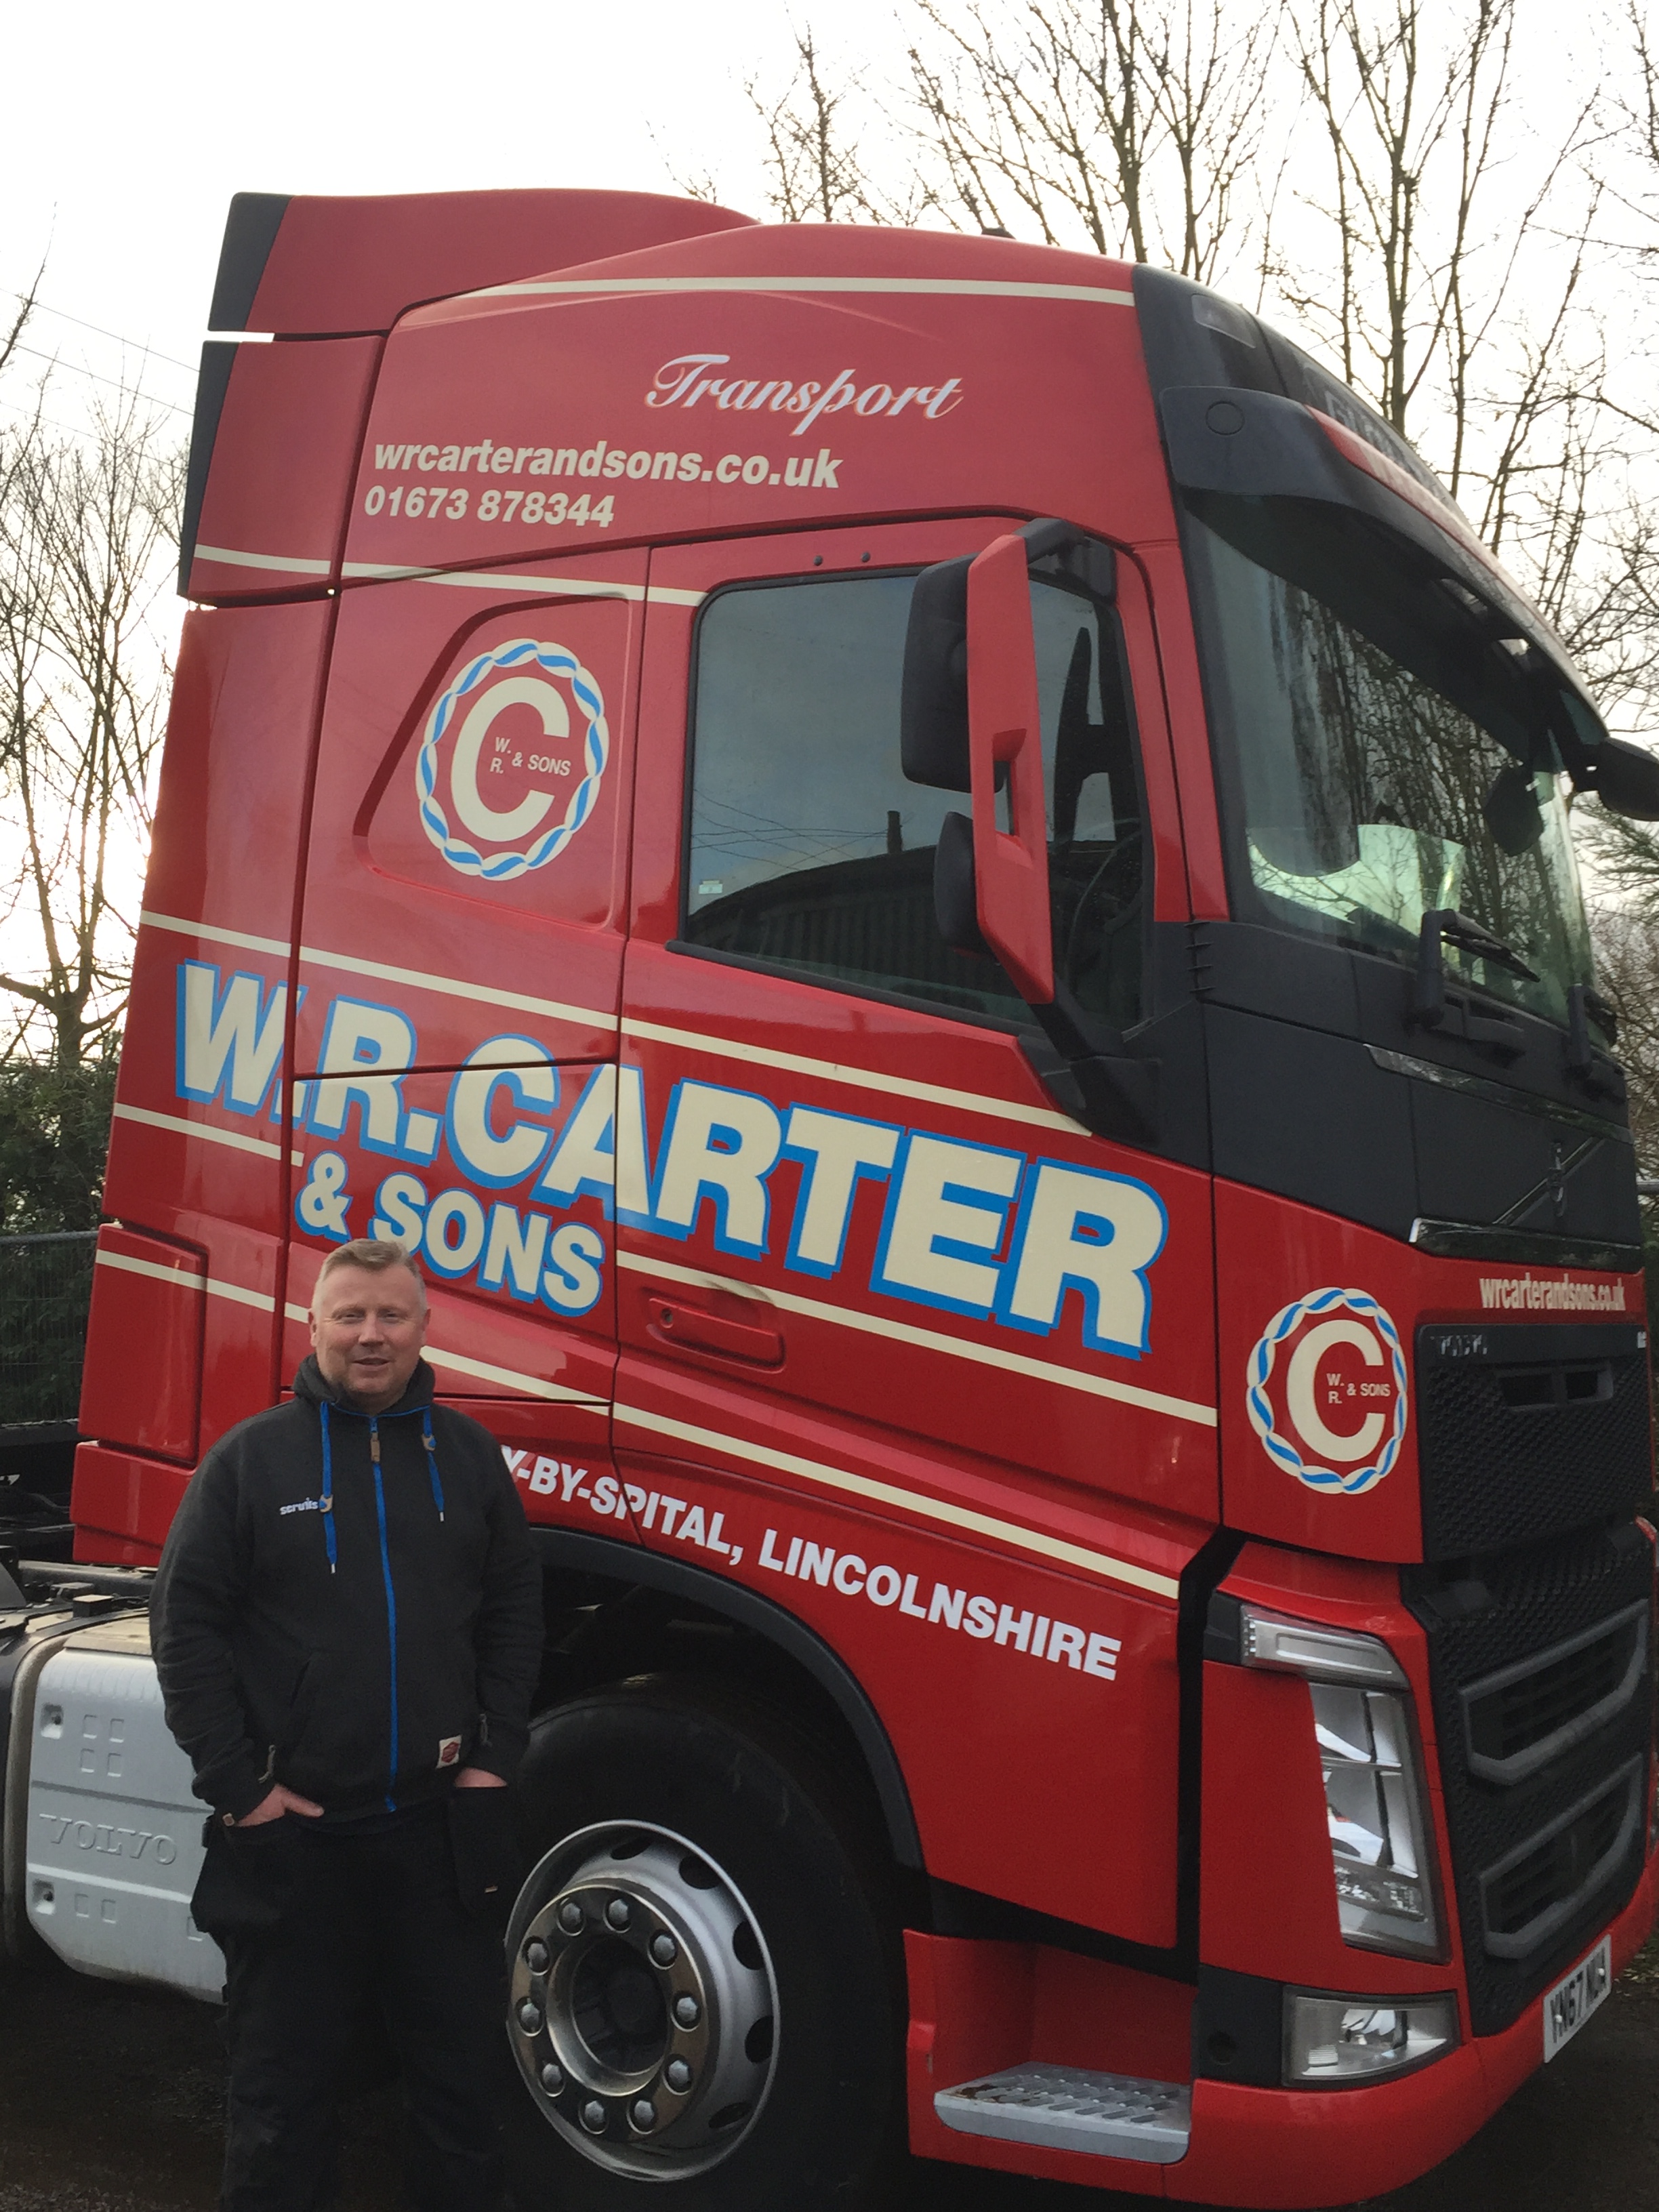 Booming Pooling sector drives haulier investment